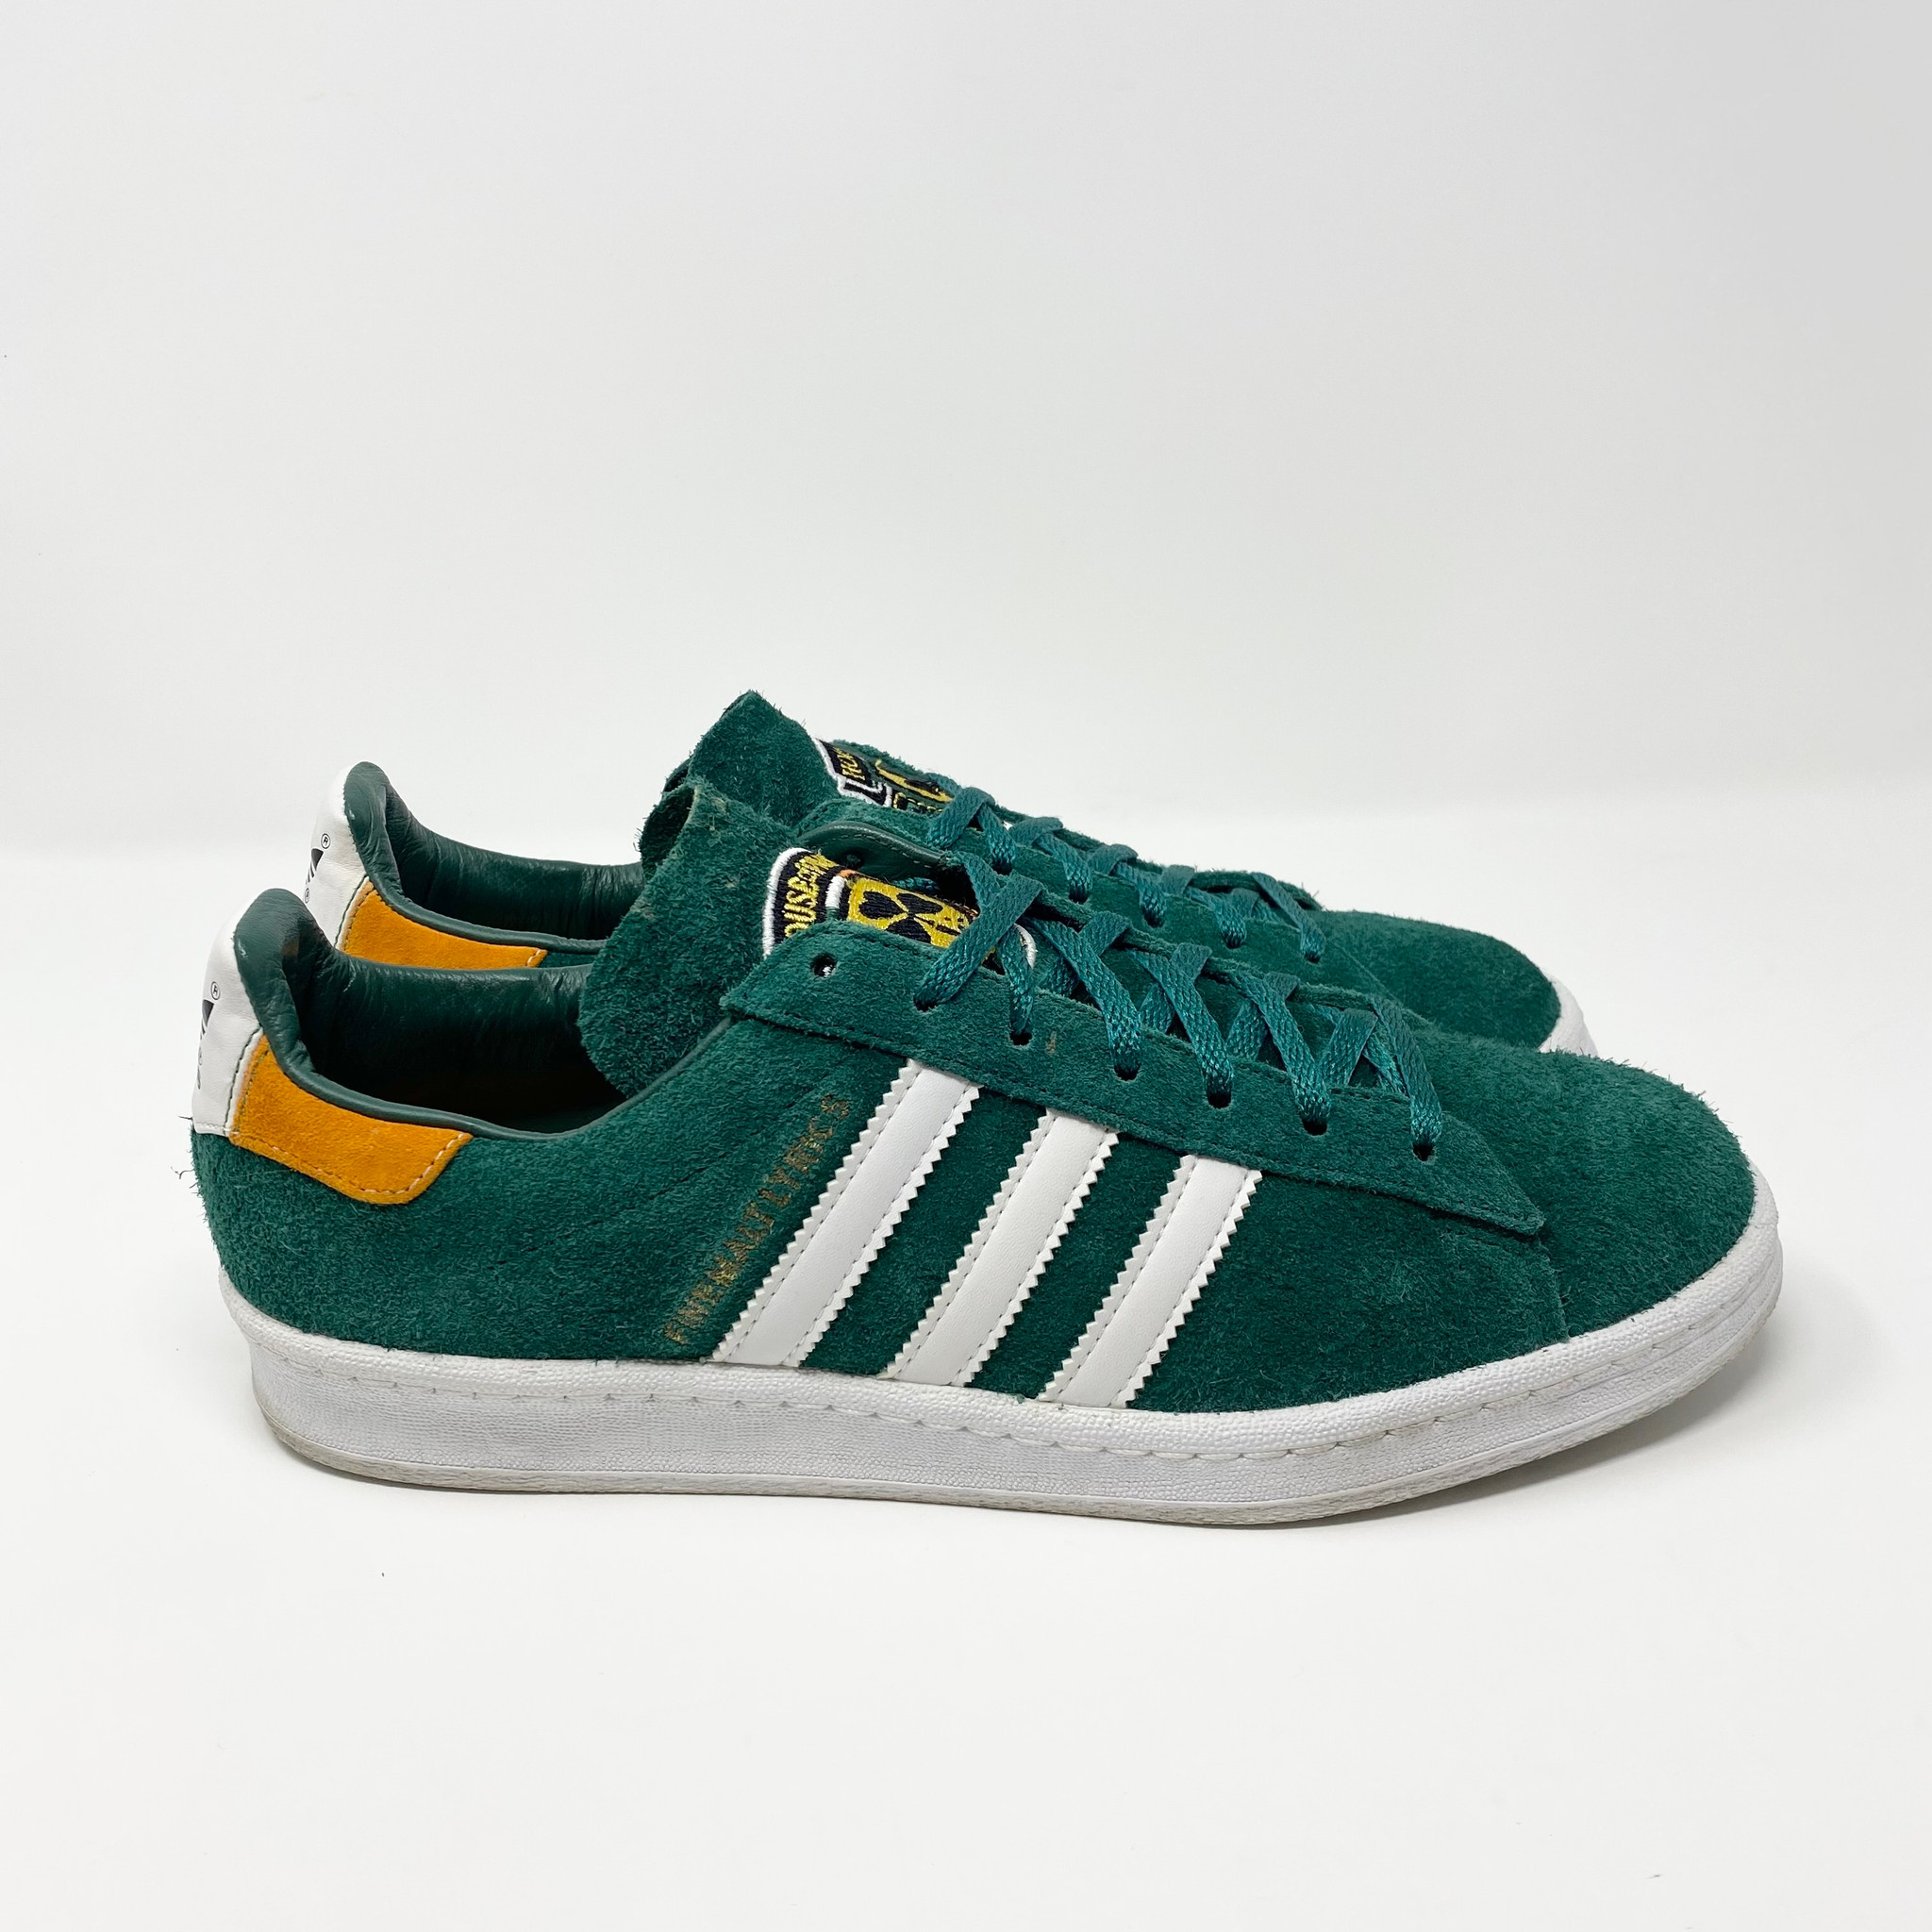 Adidas Campus 80 House of Pain